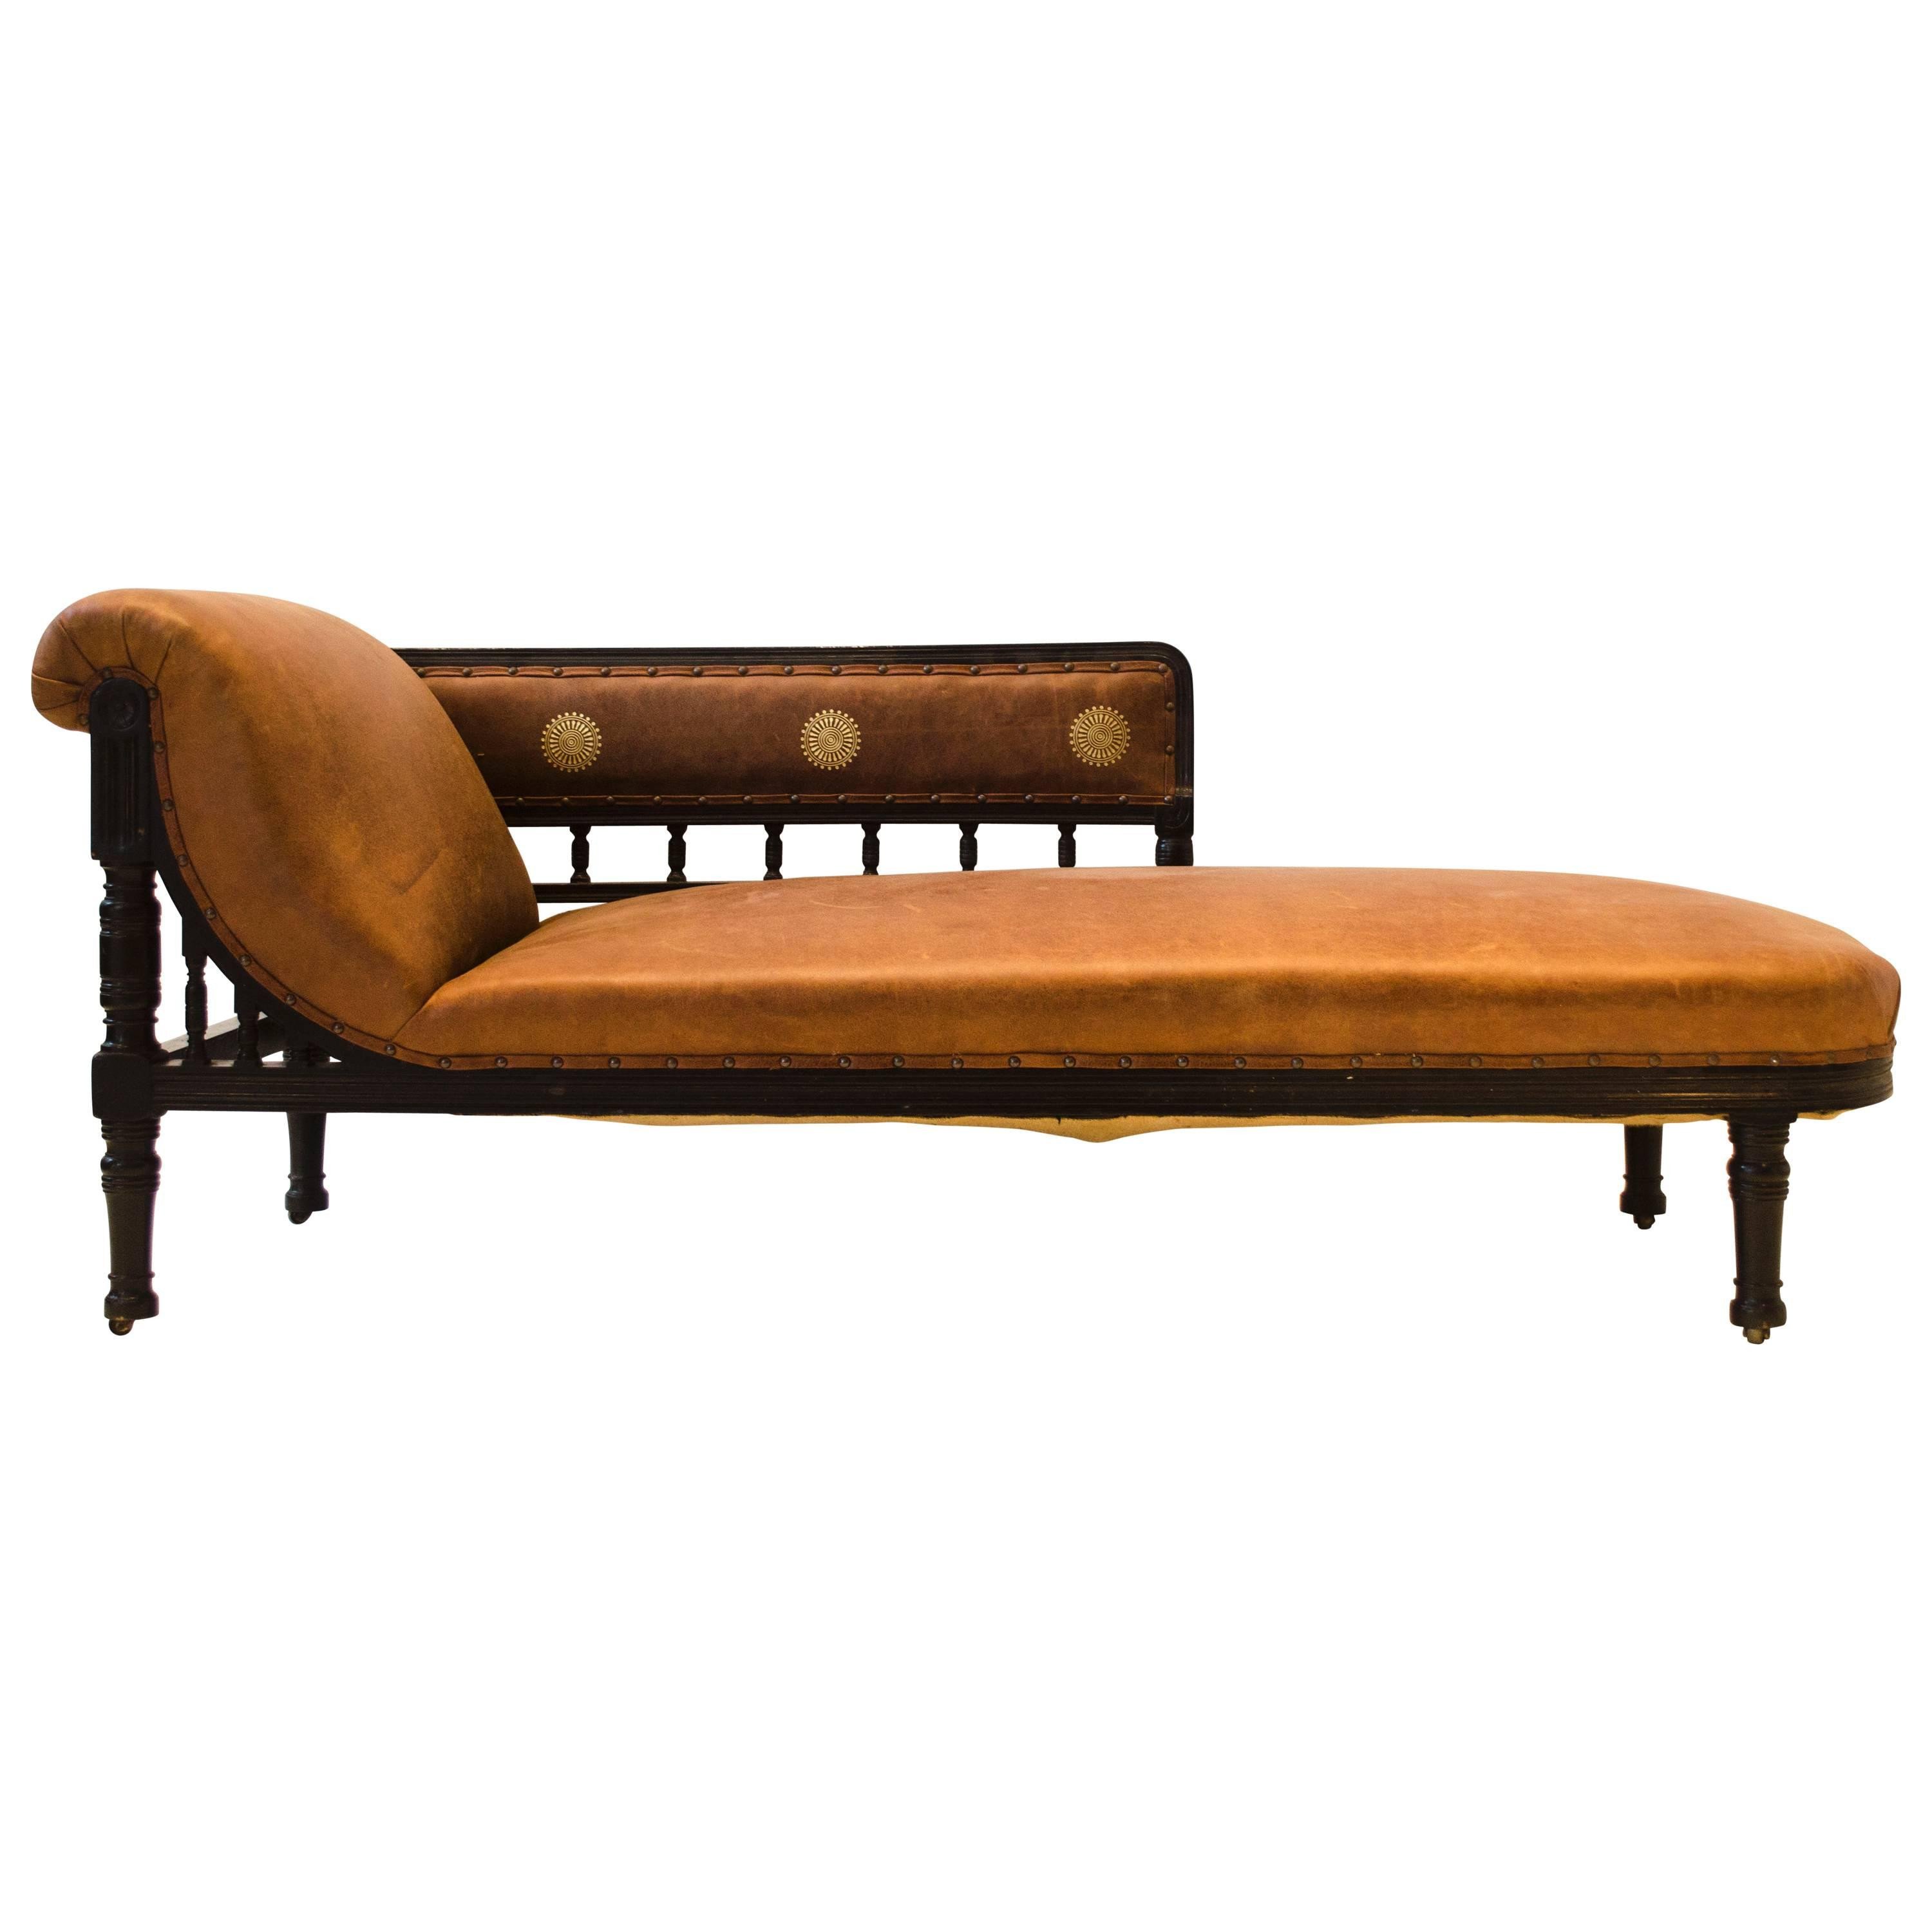 Chaise Chair for Bedroom New Anglo Japanese Ebonized Chaise Longue attributed to E W